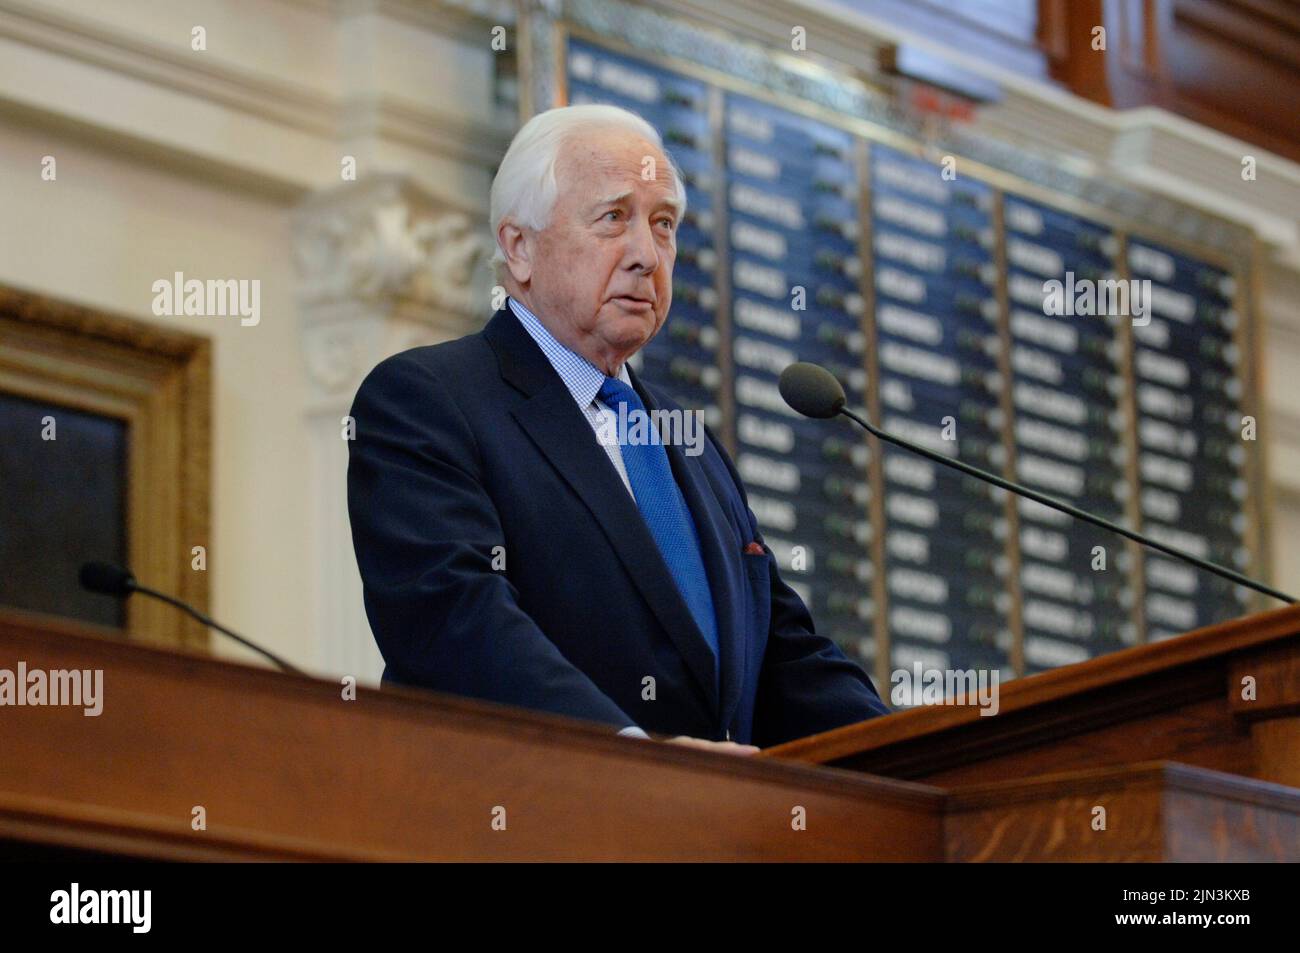 Austin, TX, USA. 28th Oct, 2005. Author DAVID MCCULLOUGH, two-time Pulitzer Prize and National Book Award winner, whose best-selling biographies of Harry Truman and John Adams made him one of America's most popular and acclaimed historians, died at 89. McCullough, who won the prizes for biographies on Truman (1992) and Adams (2001), was a featured author at the 2005 Texas Book Festival in Austin. (Credit Image: © Bob Daemmrich/ZUMA Press Wire) Stock Photo